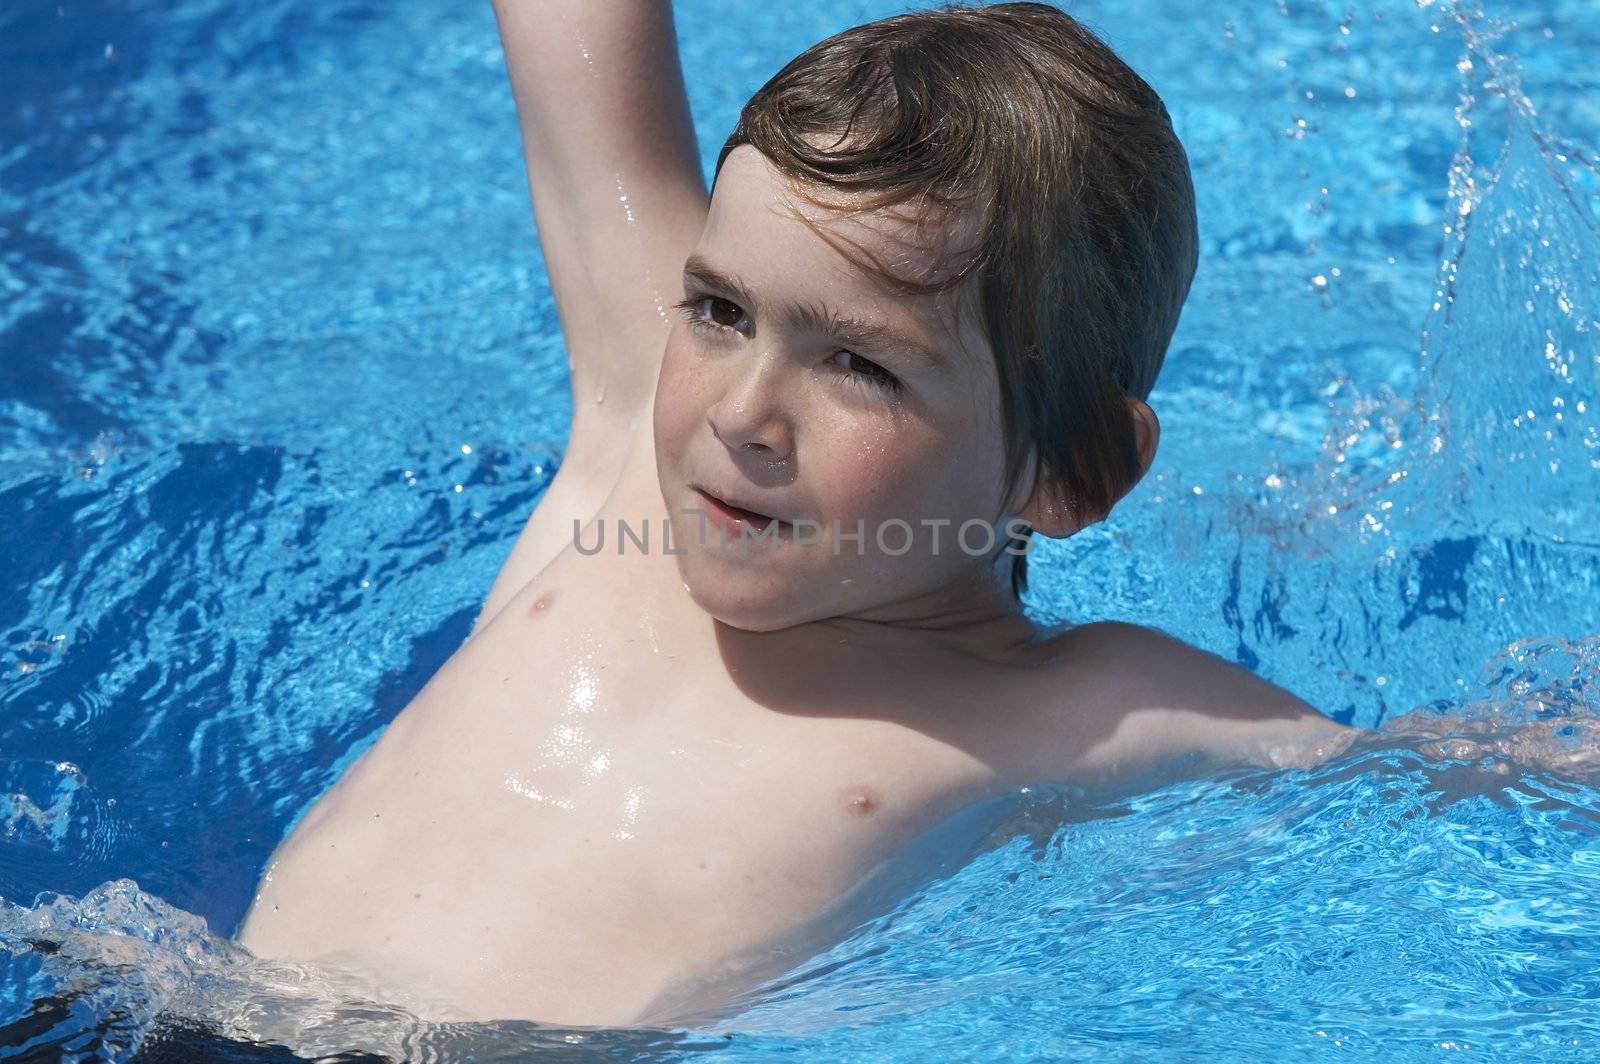 a boy playing in a pool of water during the summer